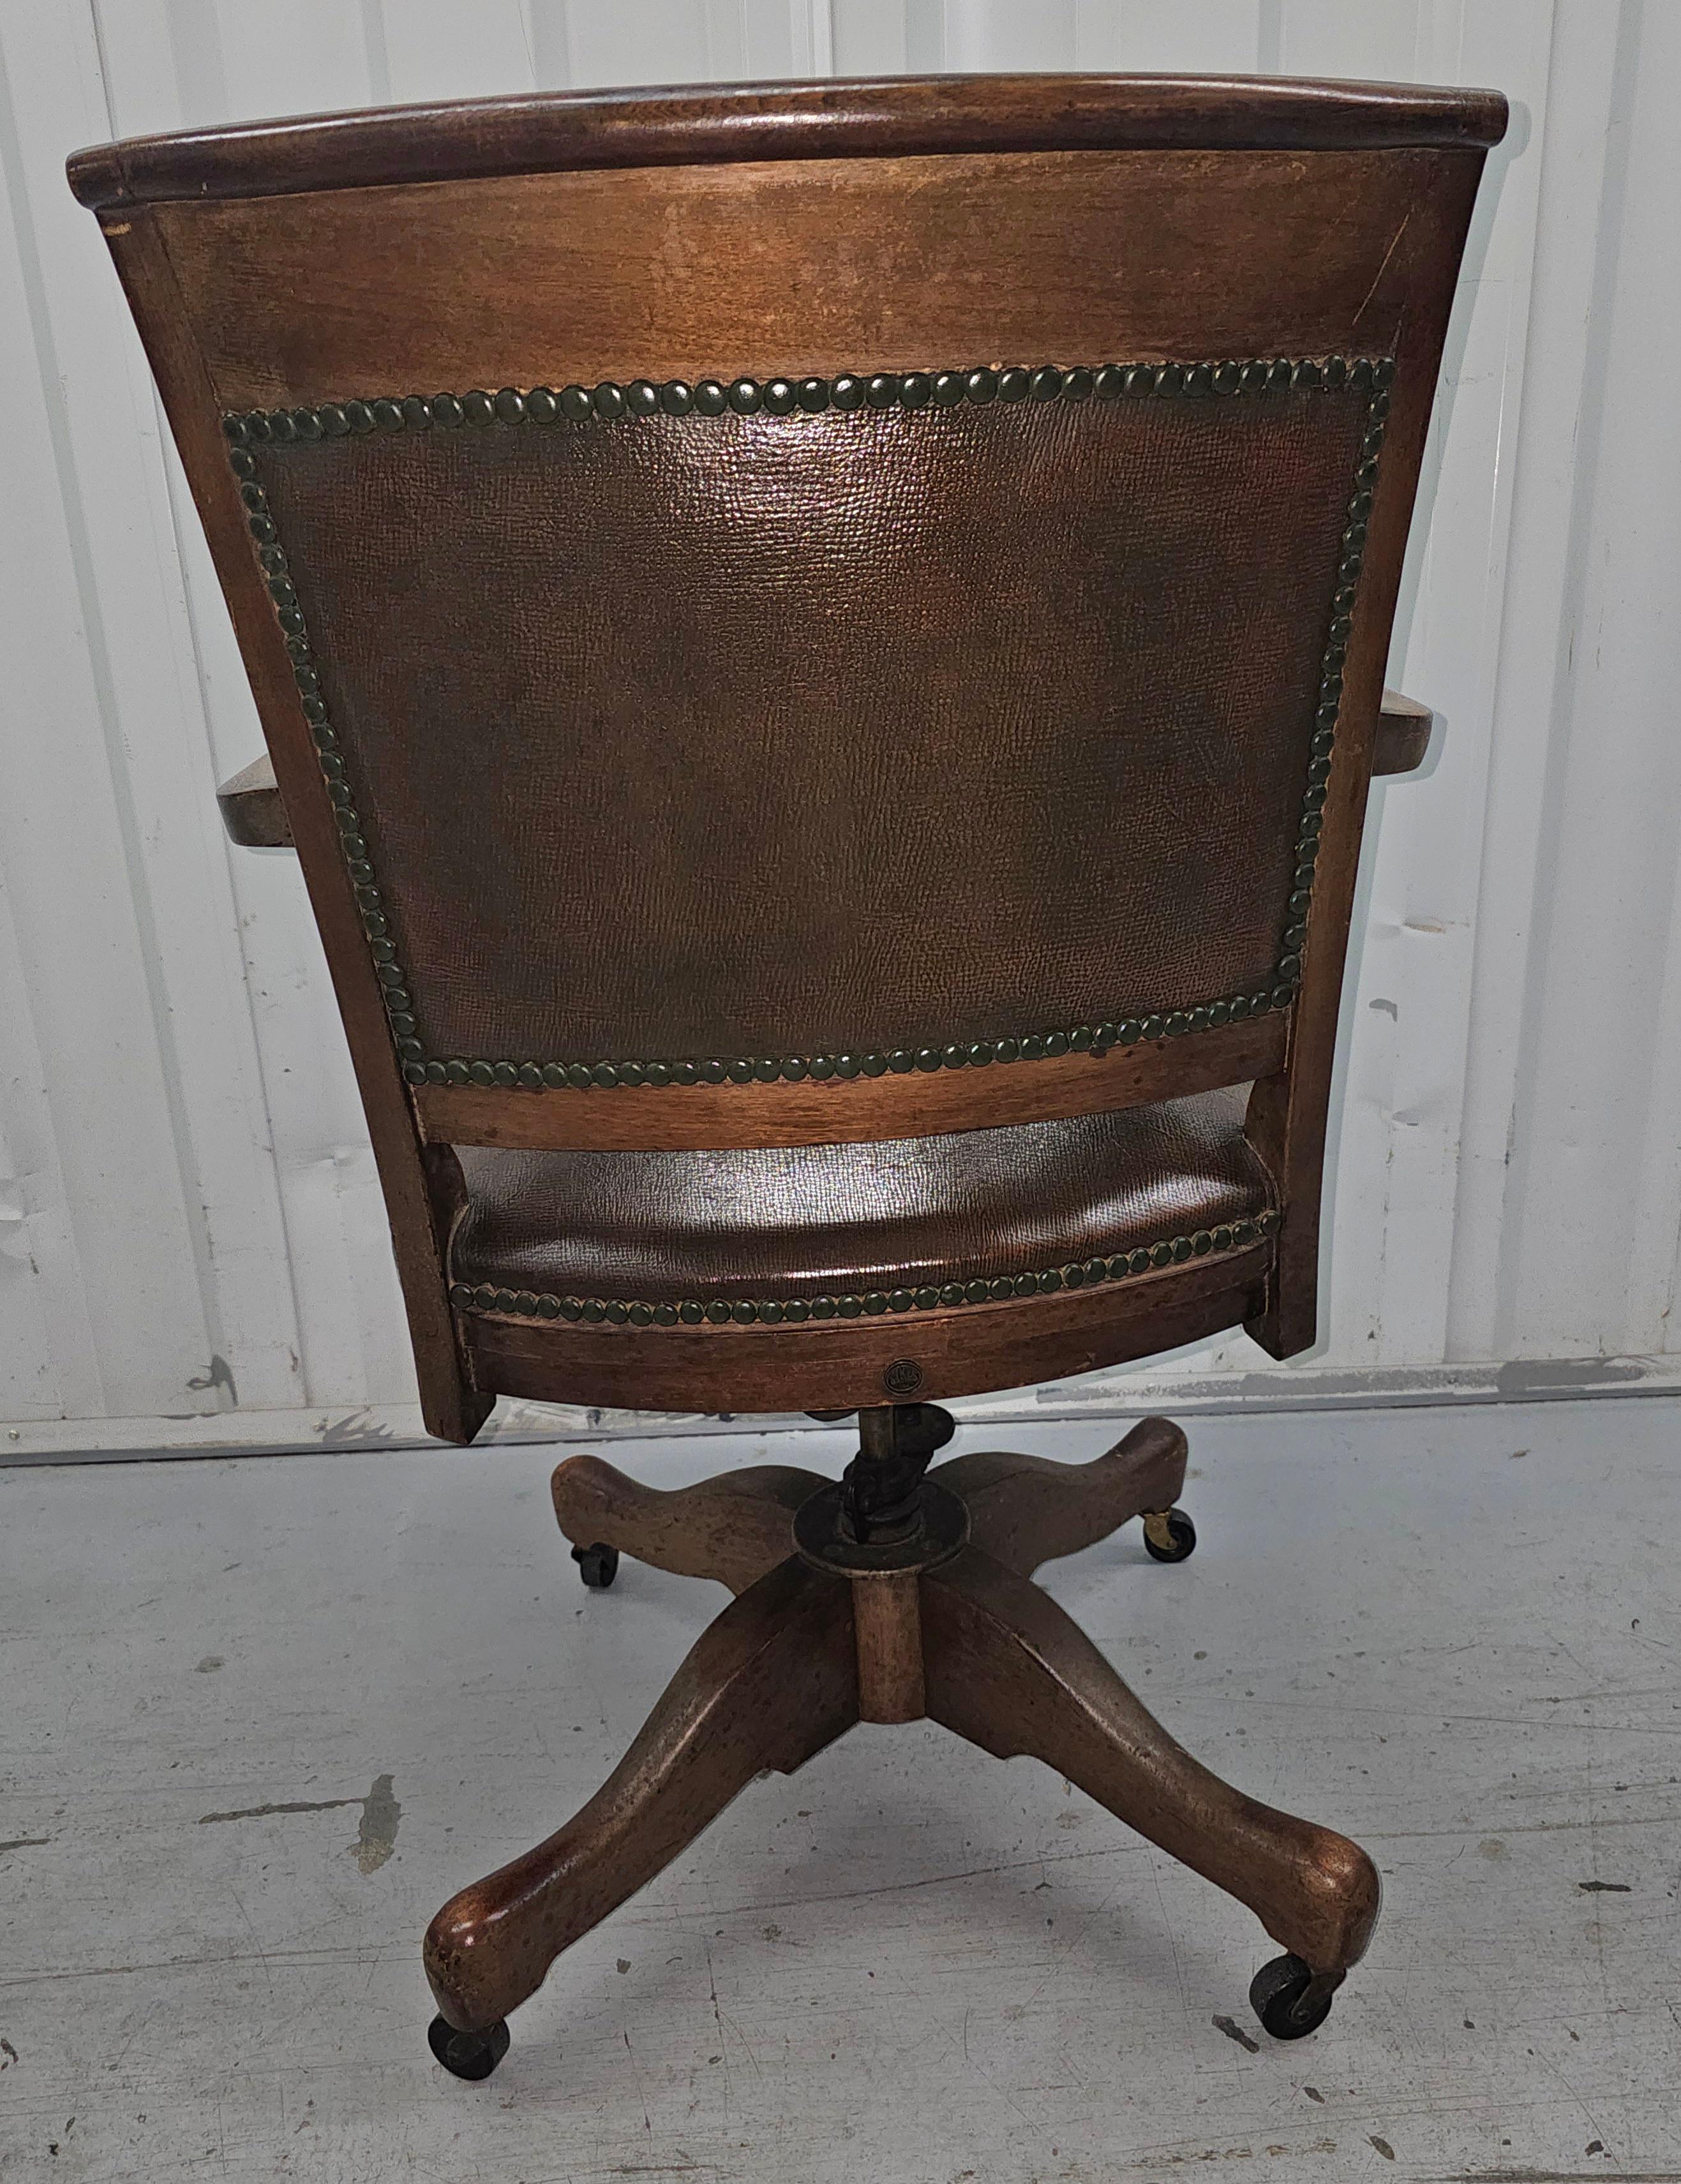 Edwardian 1900s Sikes Furniture Walnut & Leather Upholstered Desk Chair For Sale